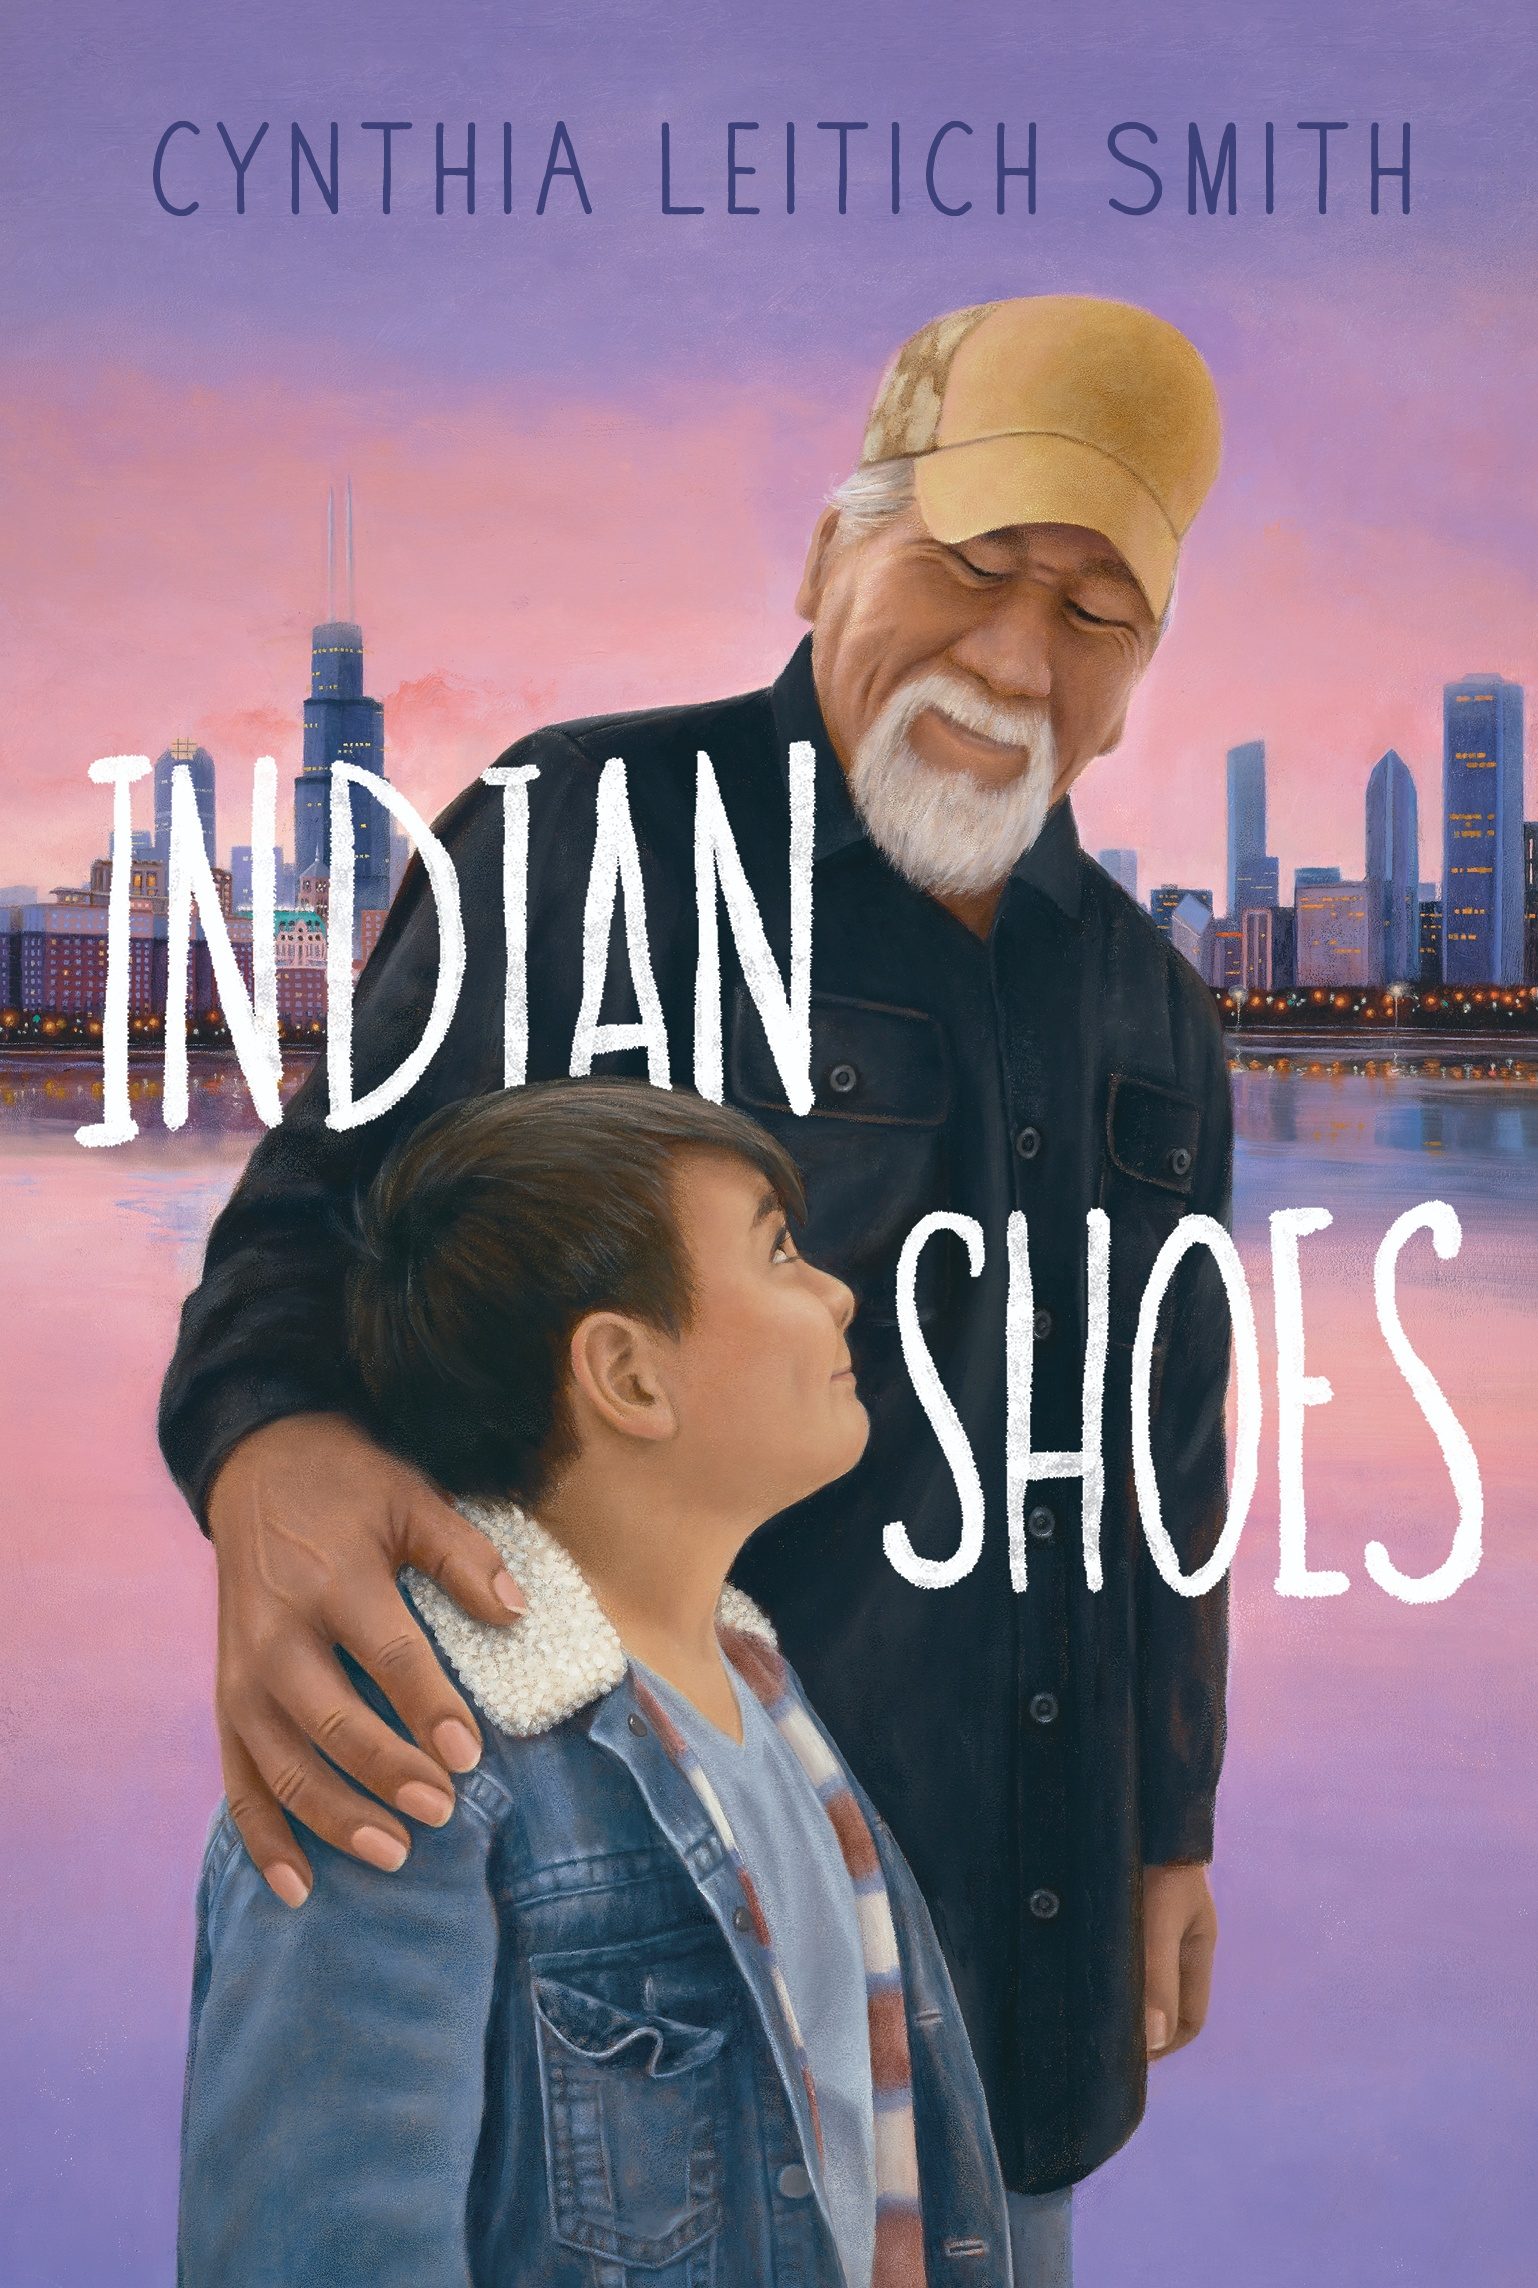 Indian Shoes: Readers Guide - Cynthia Leitich Smith